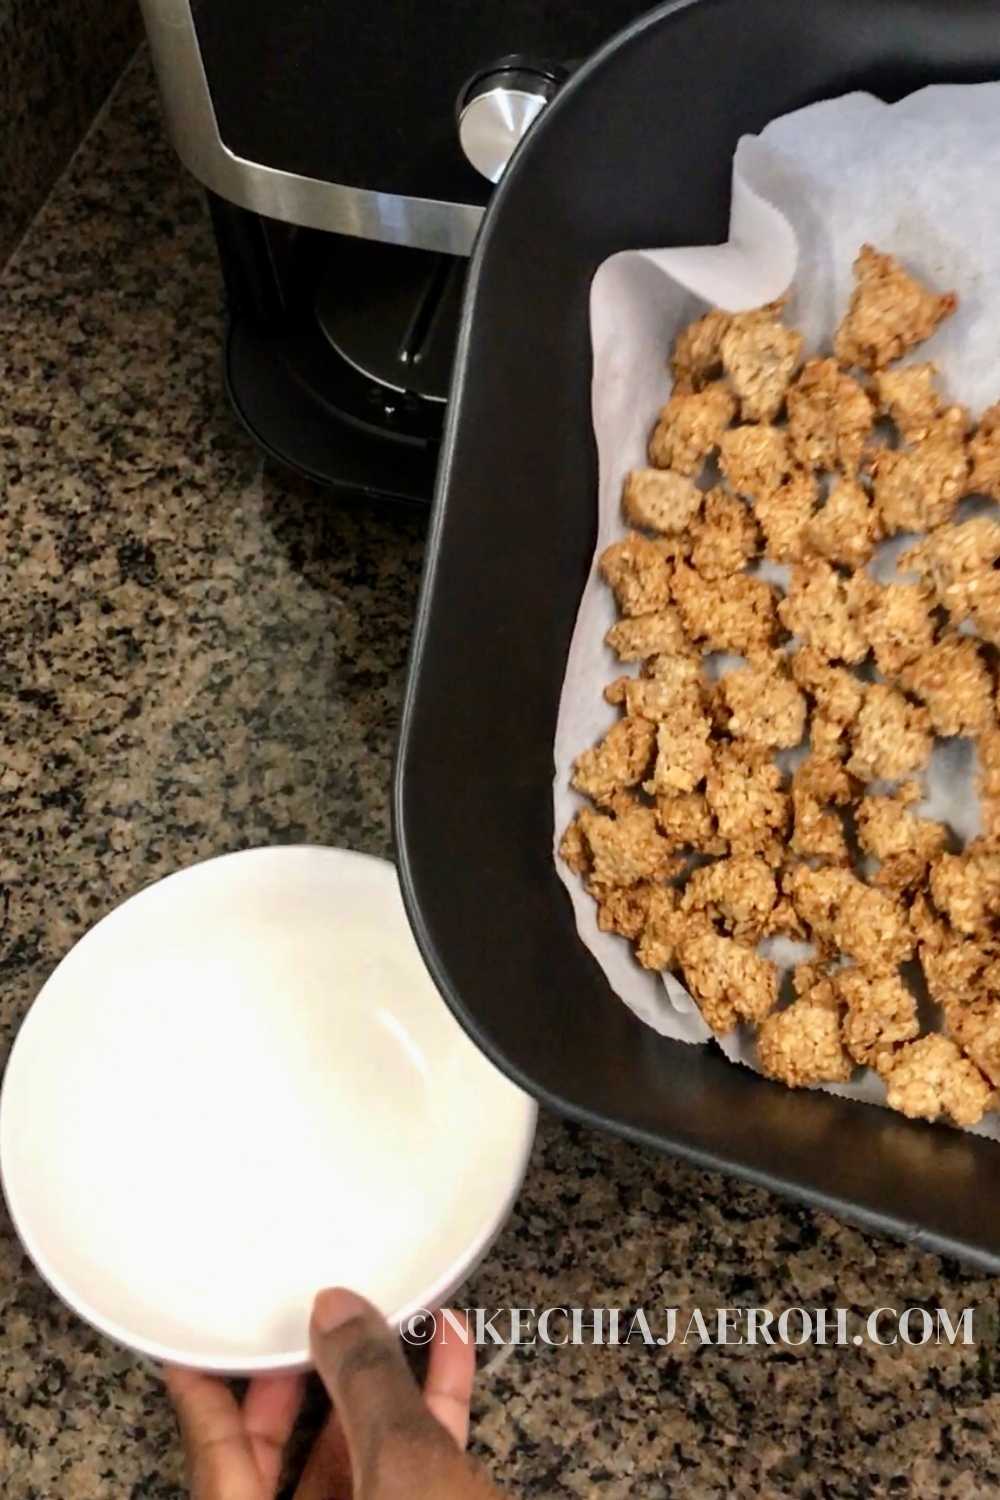 Easy recipe for healthy banana oat granola clusters in the air fryer! This chunky granola is vegan, gluten-free, and refined sugar-free, and they come together so quickly in your air fryer! Homemade granola clusters are healthier and better than anything you can buy. Banana granola has no preservatives, refined sugar, or artificial ingredients. It is also dairy-free! Simply combine overripe banana and oat to make these healthy chunky granolas in your air fryer! #bananagranola #chunkygranola #airfryergranola #granolarecipe